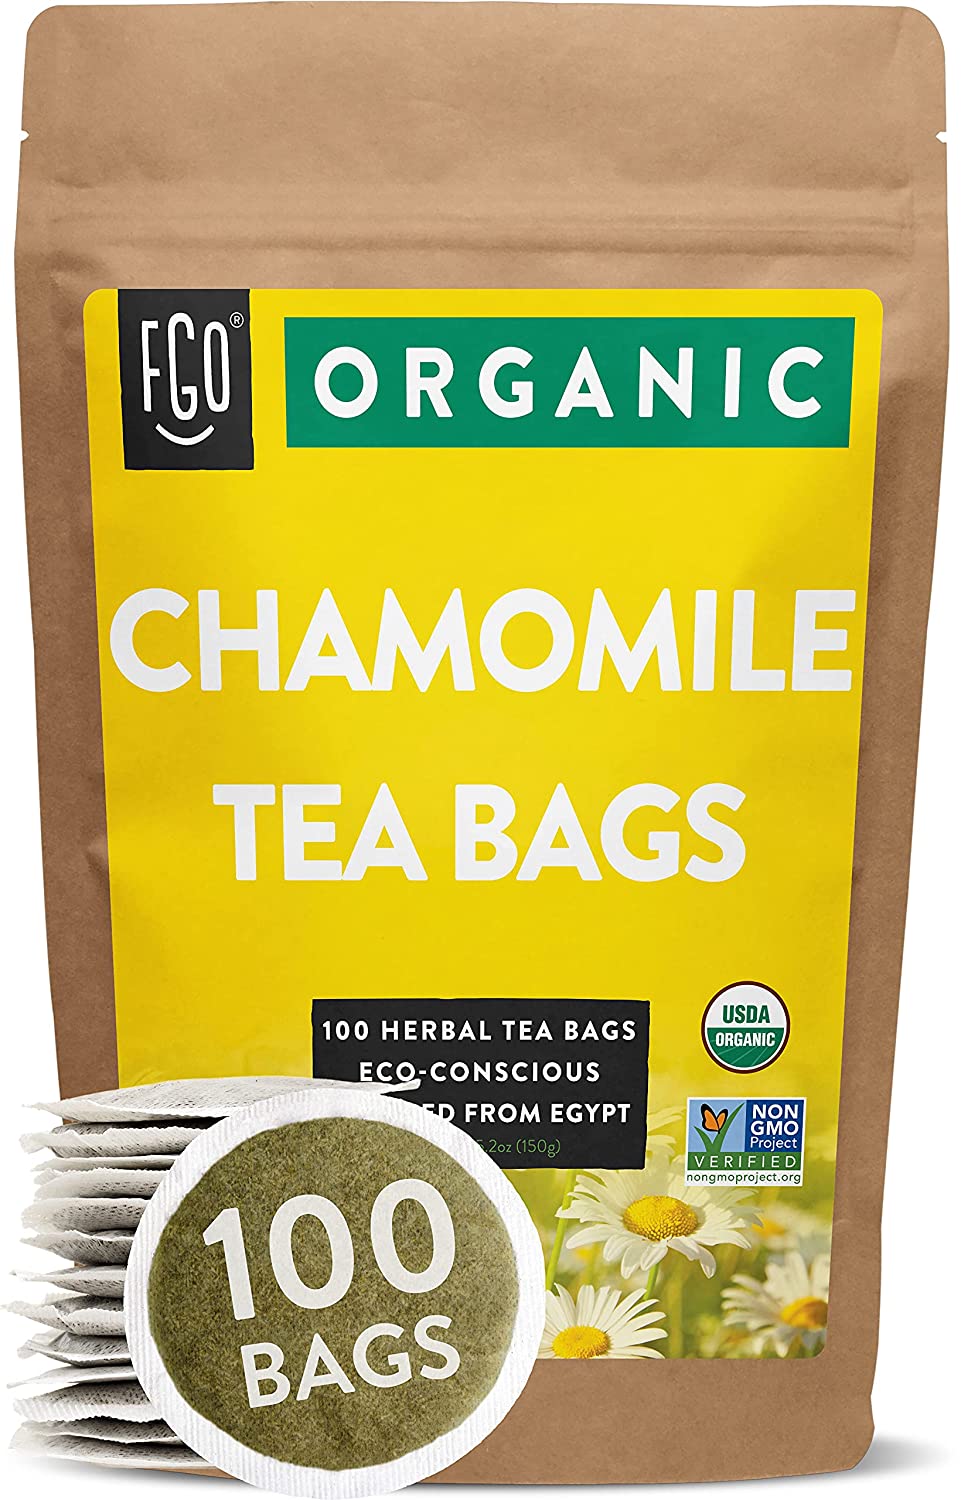 Style: Tea bags, Flavor Name: Chamomile, Size: 100 Count (Pack of 1)